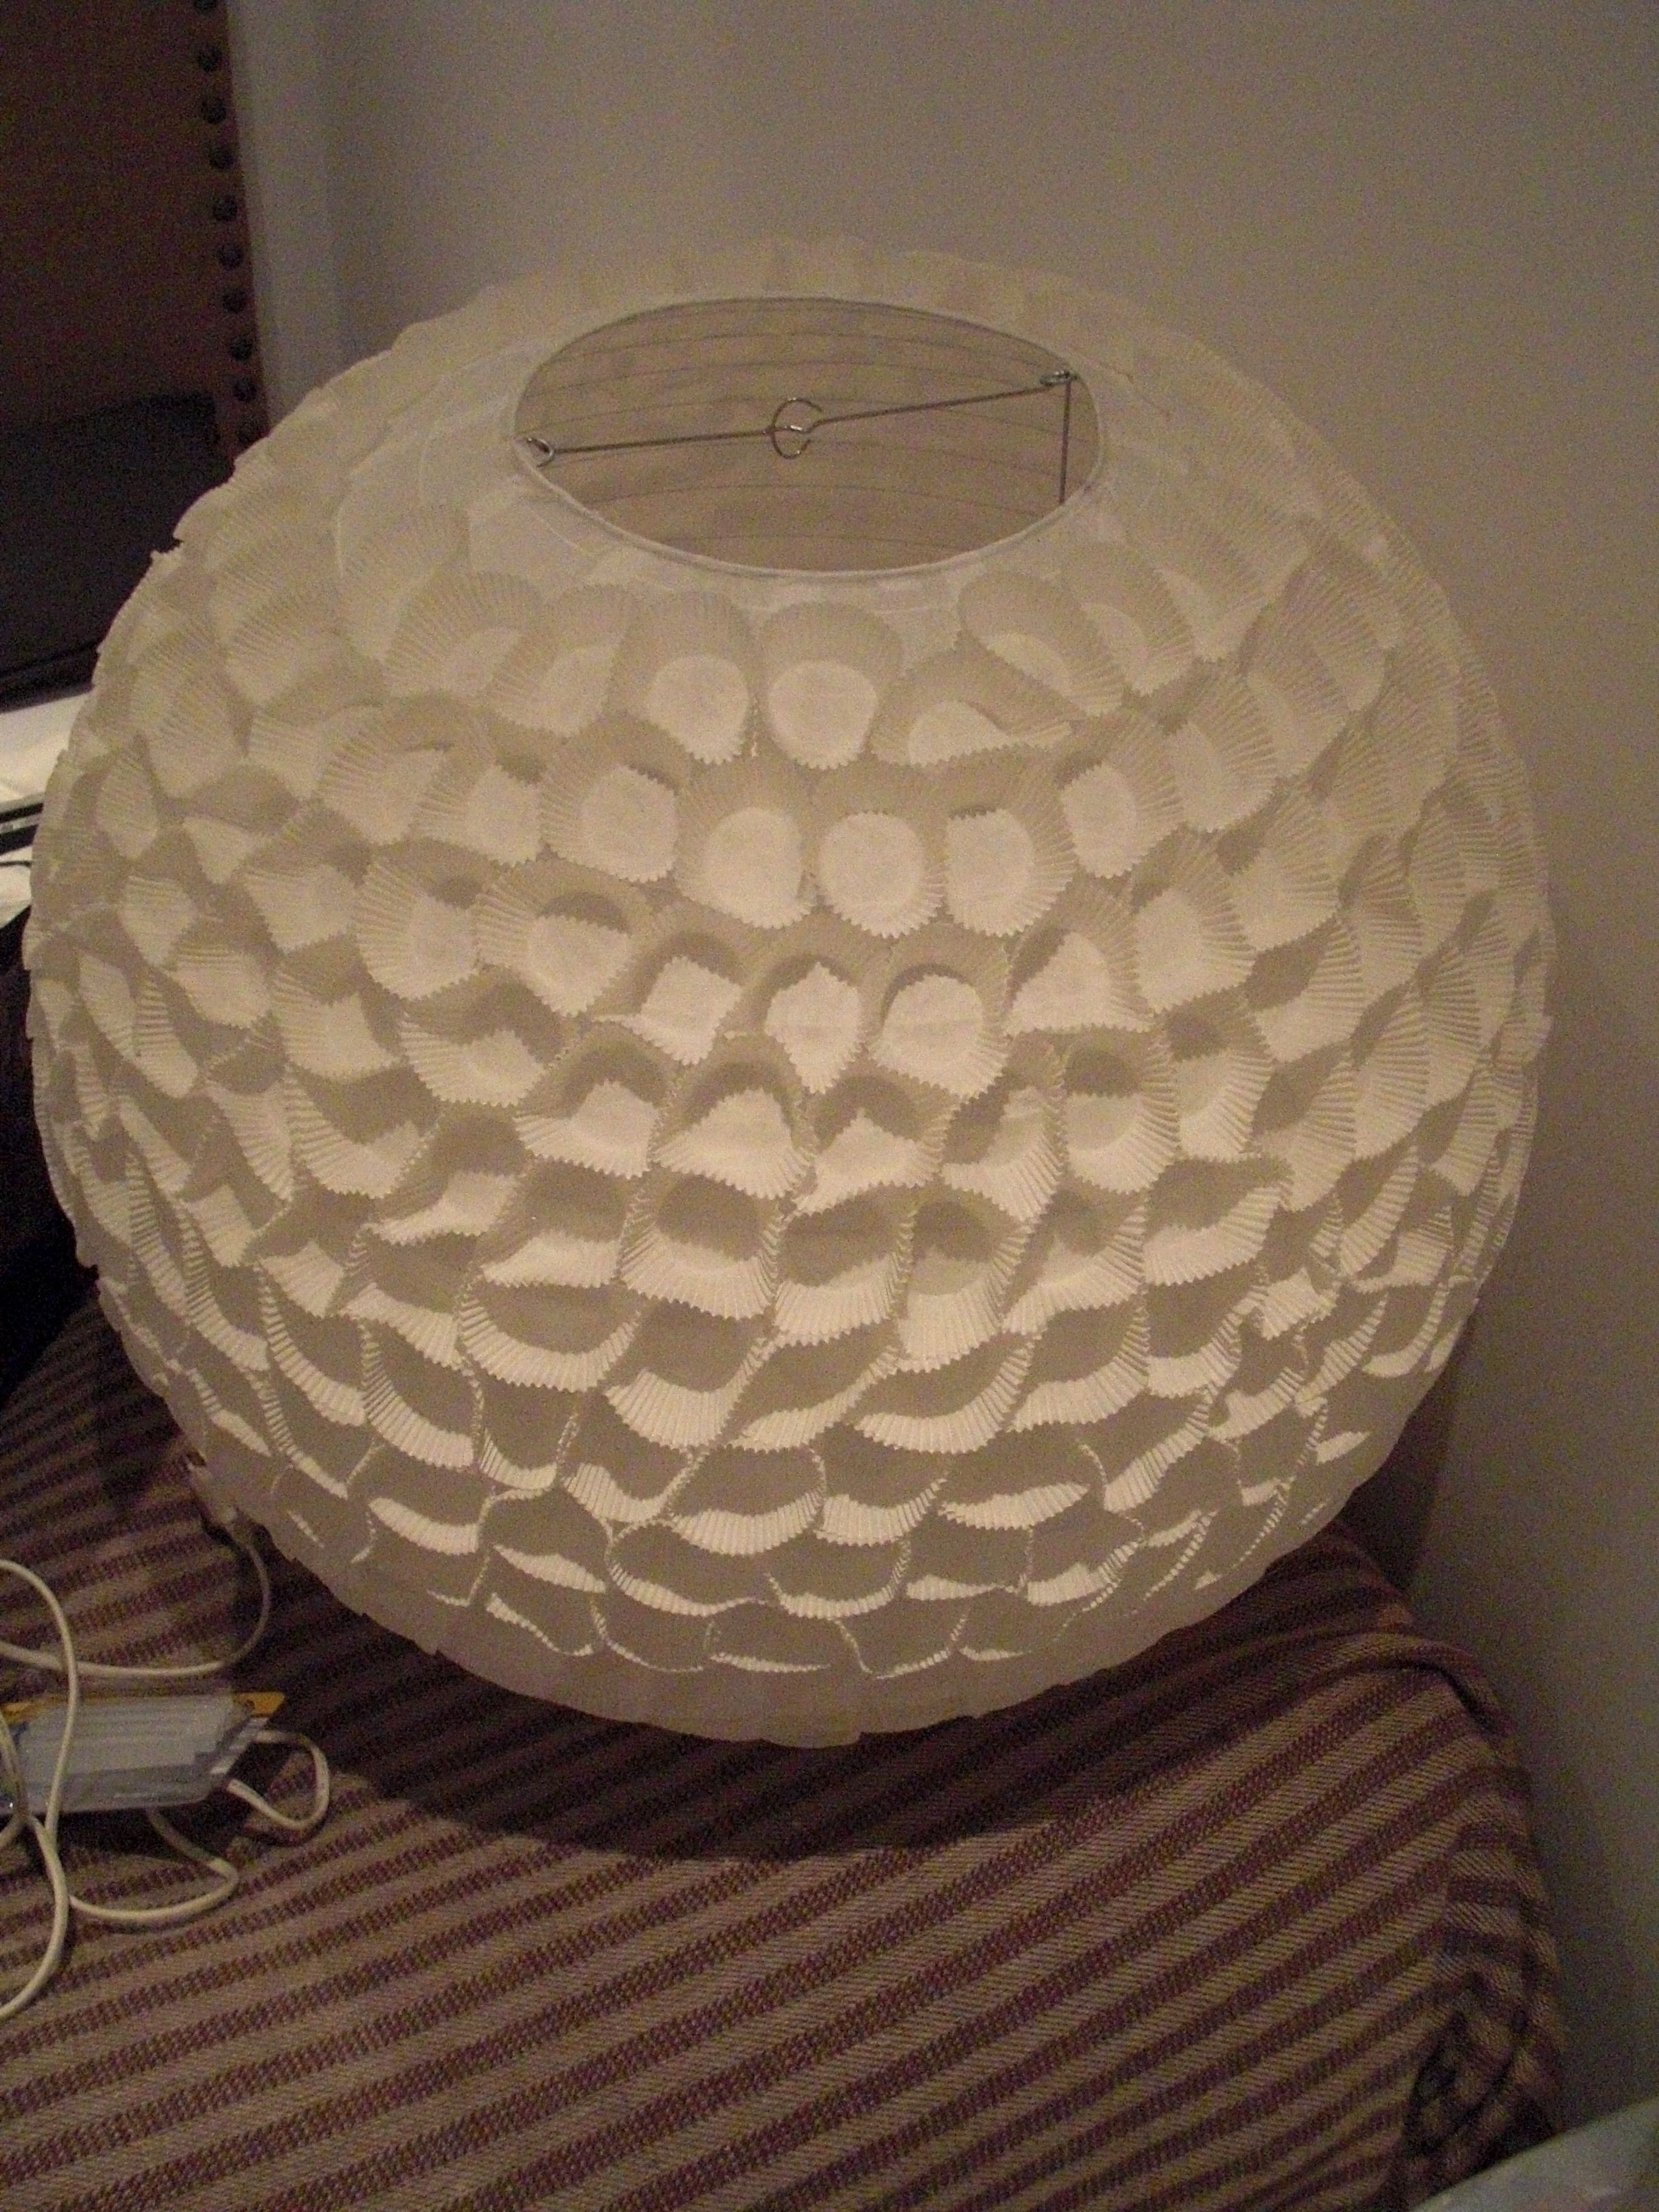 17 Diy Paper Lampshades Guide Patterns, Giant Paper Ball Lamp Shade